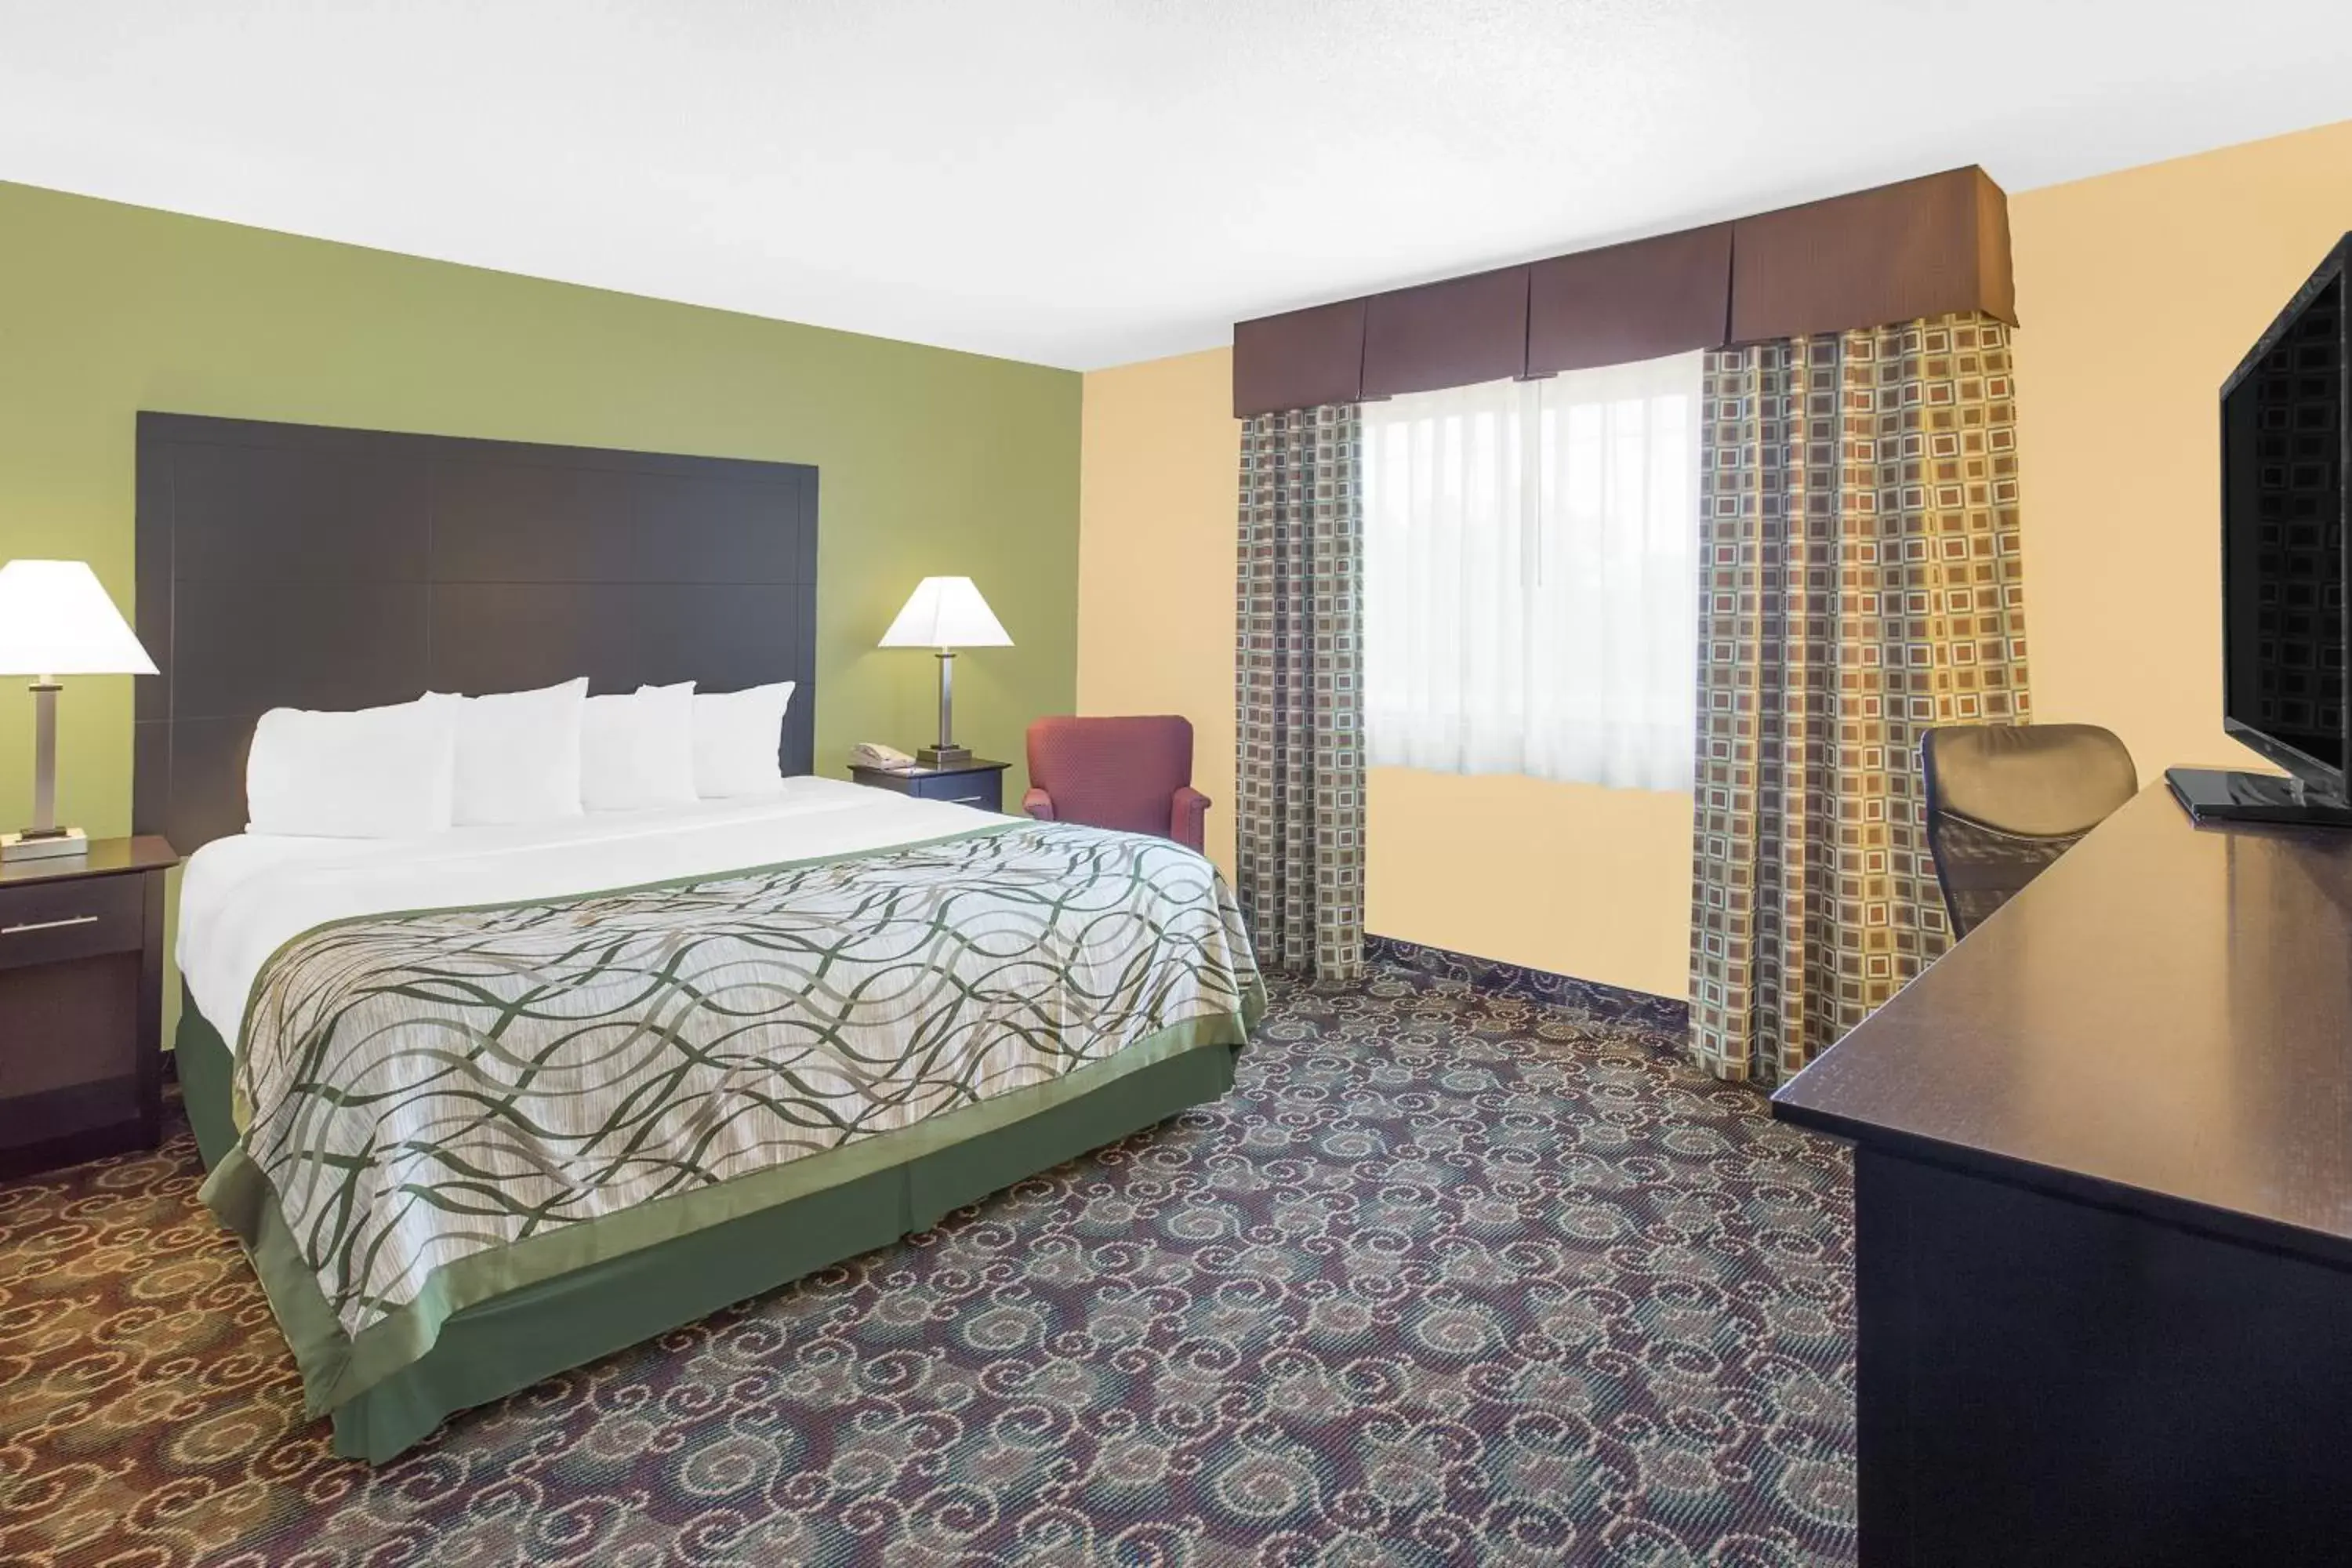 Bed, Room Photo in Baymont by Wyndham Holland